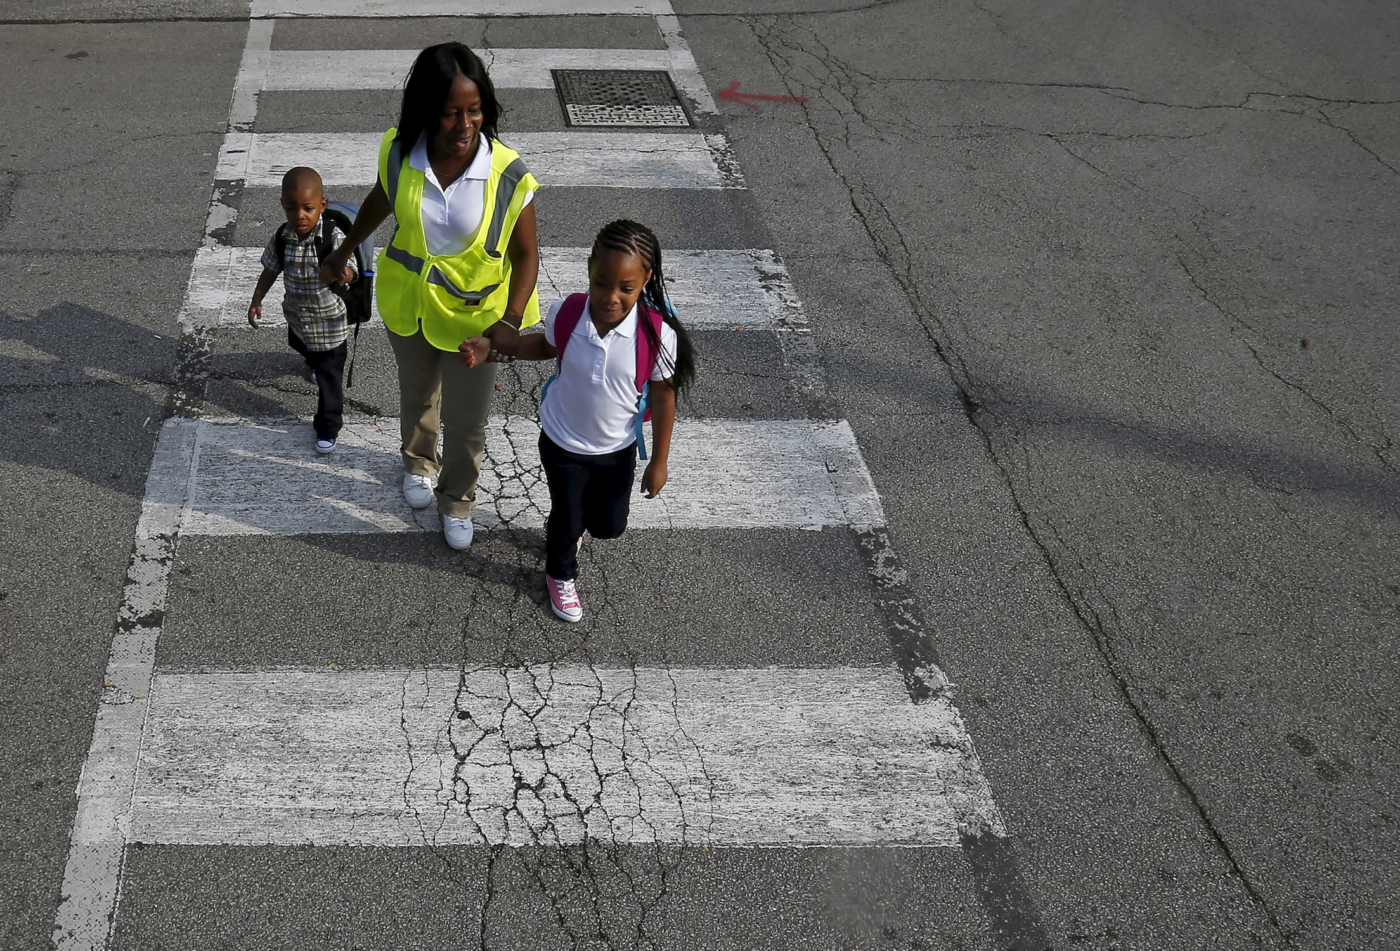 crossing-guard-helping-black-children-across-the-street-1400x951, Walking while Black: The inequitable intersection of racism at the intersection, World News & Views 